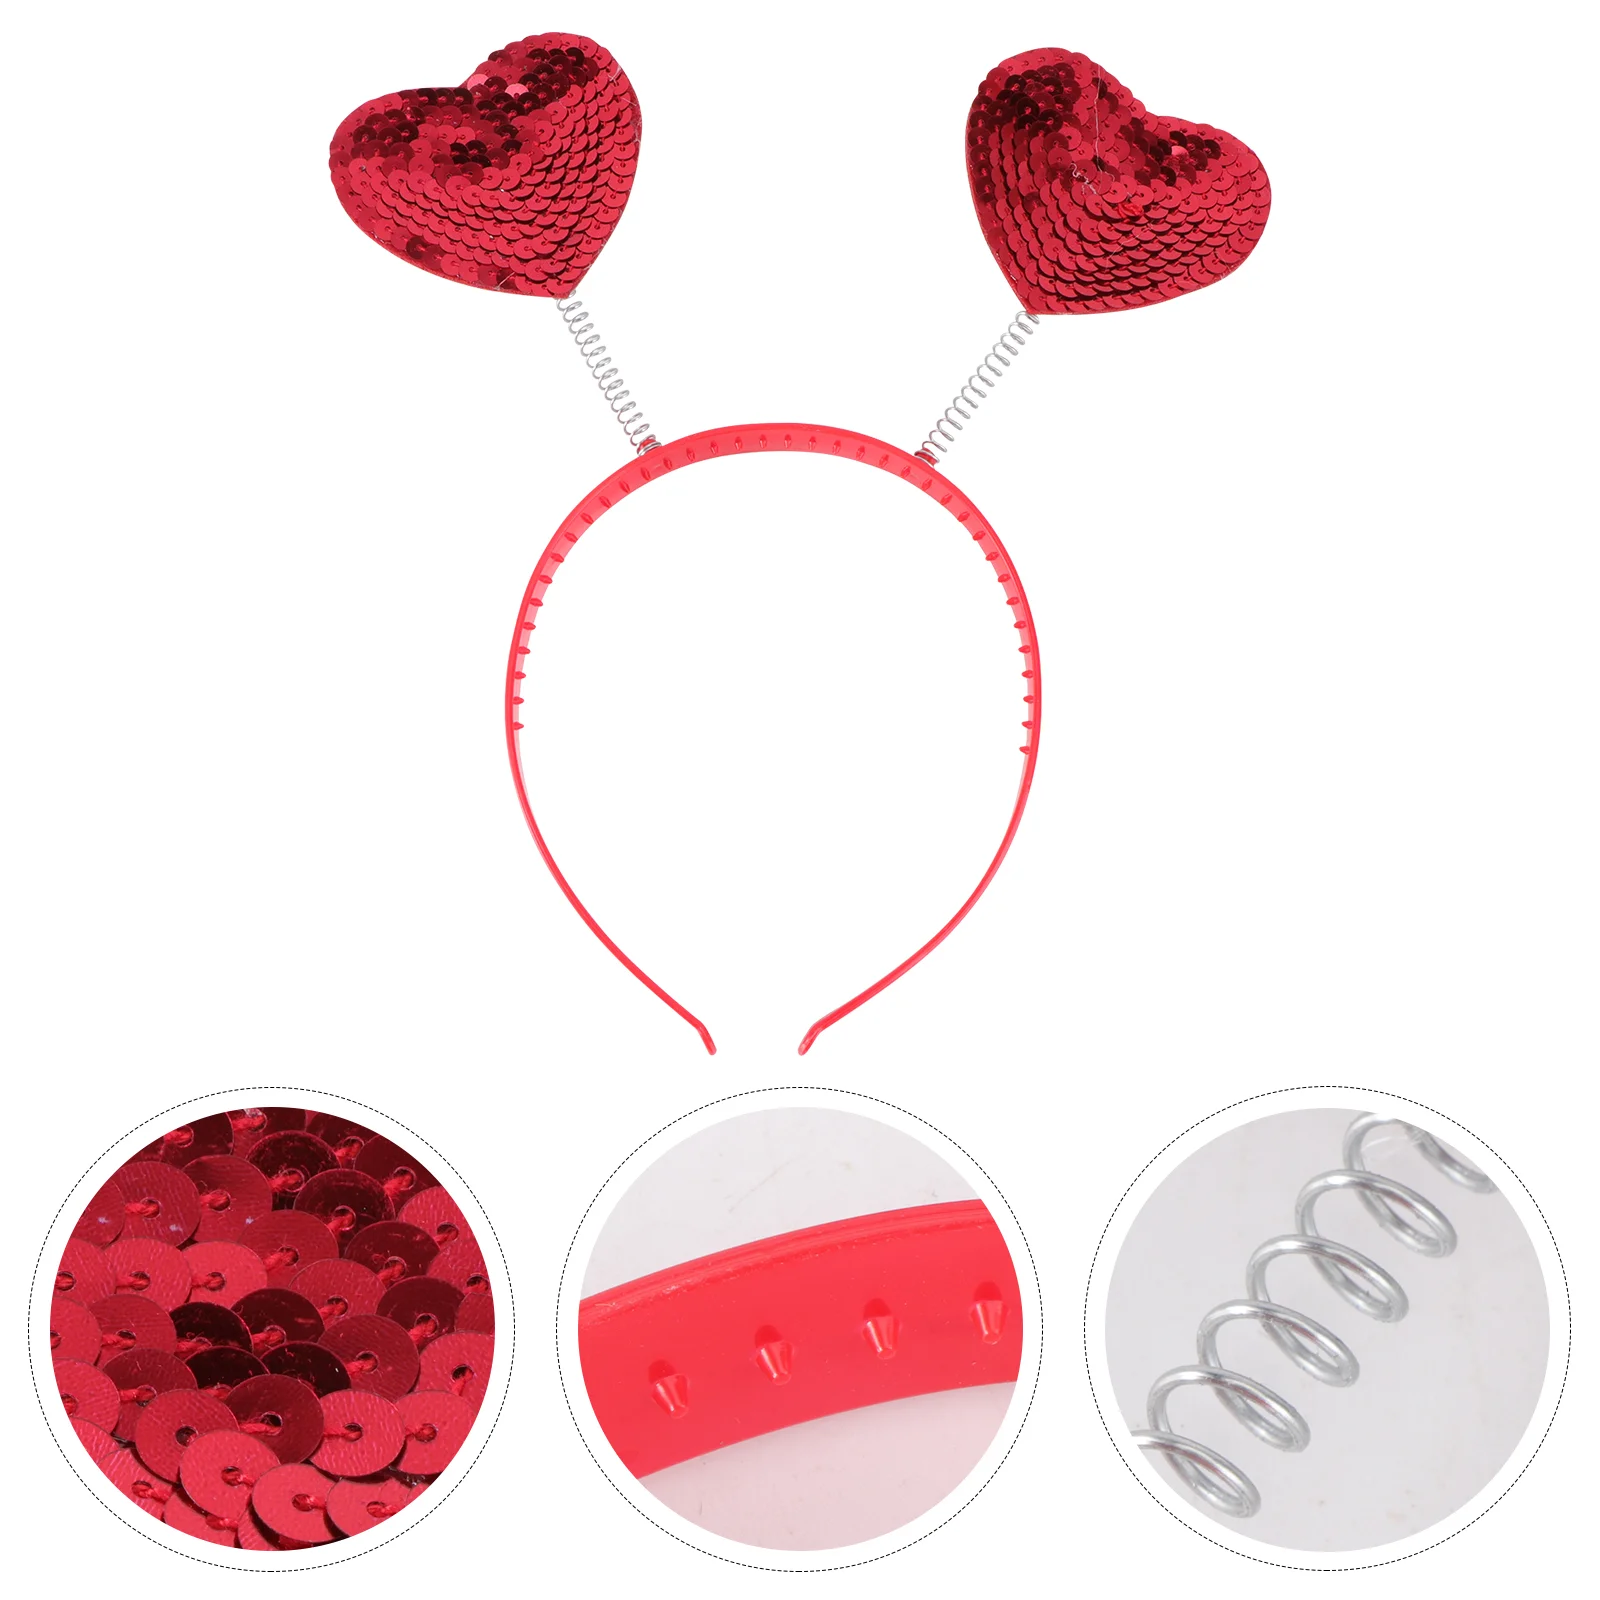 Osaladi Christmas Decor Hearts Love Sequin Headdress Red Wedding Hair Accessories Hair Clasp Cupid Hair Accessories Costume little hearts love credit card id holder bag student women travel card cover badge gifts accessories work name card holder gifts